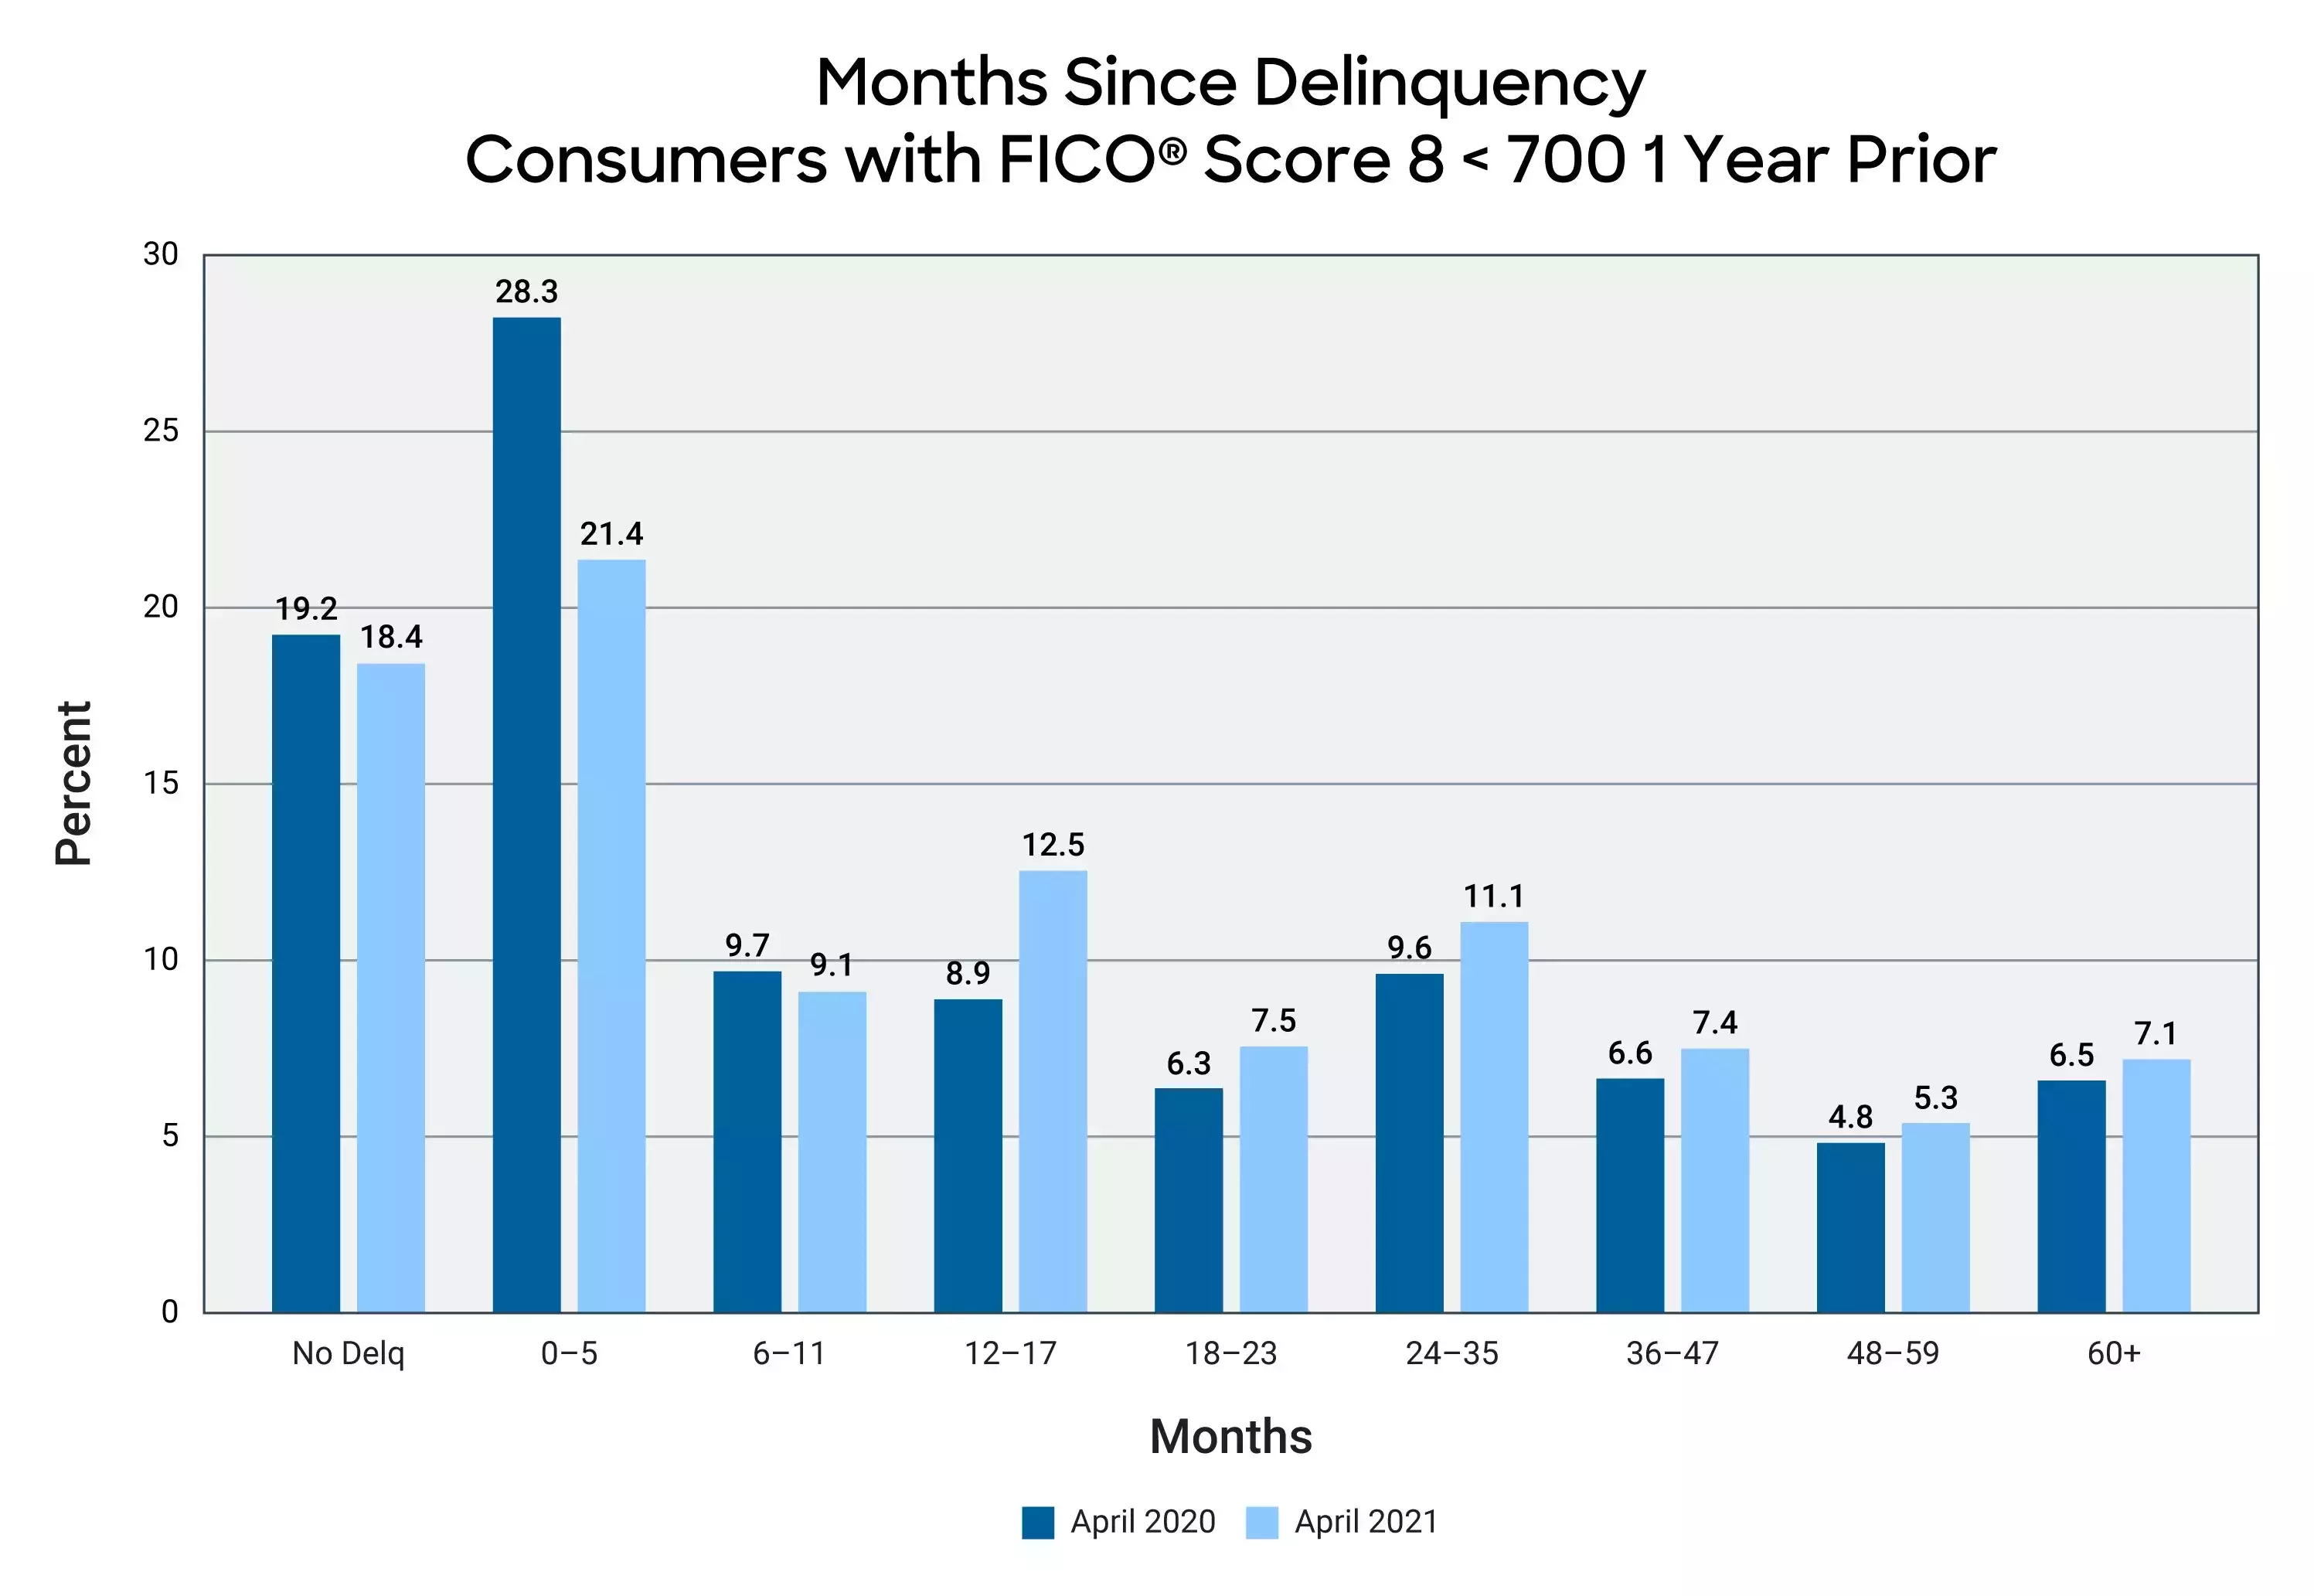 Months Since Delinquency for Consumers with FICO Score 8 < 700 1 Year Prior